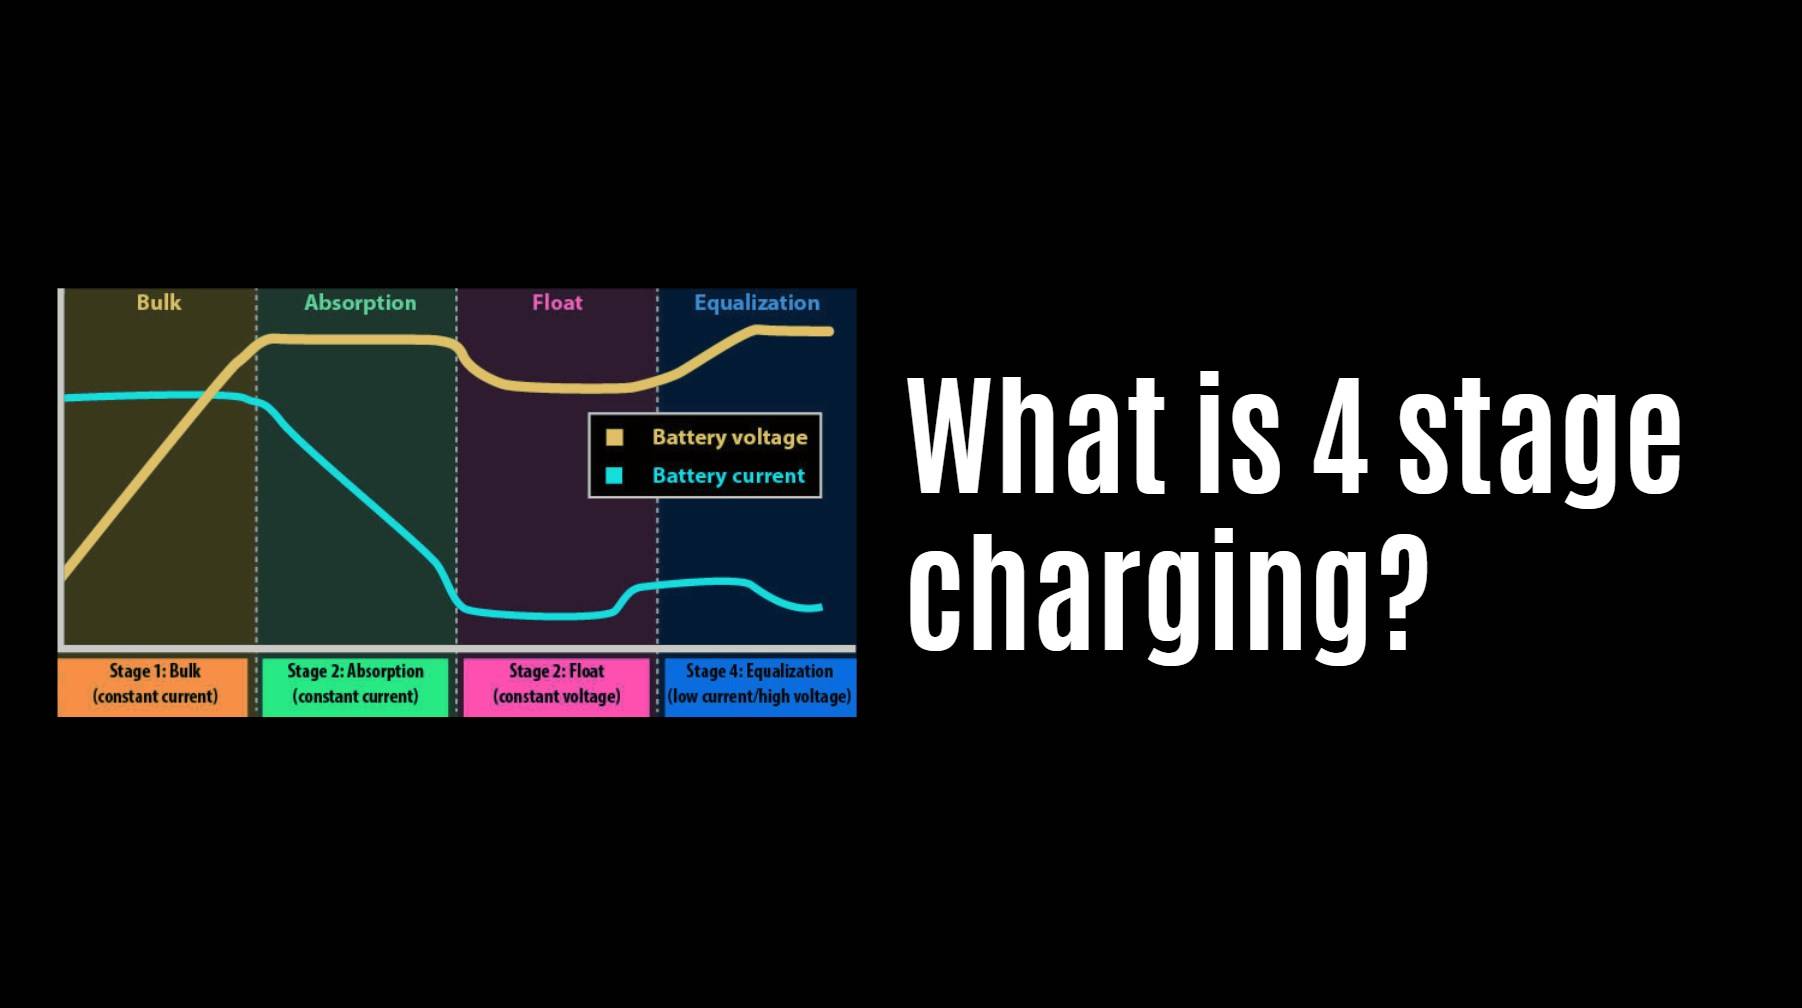 What is 4 stage charging?